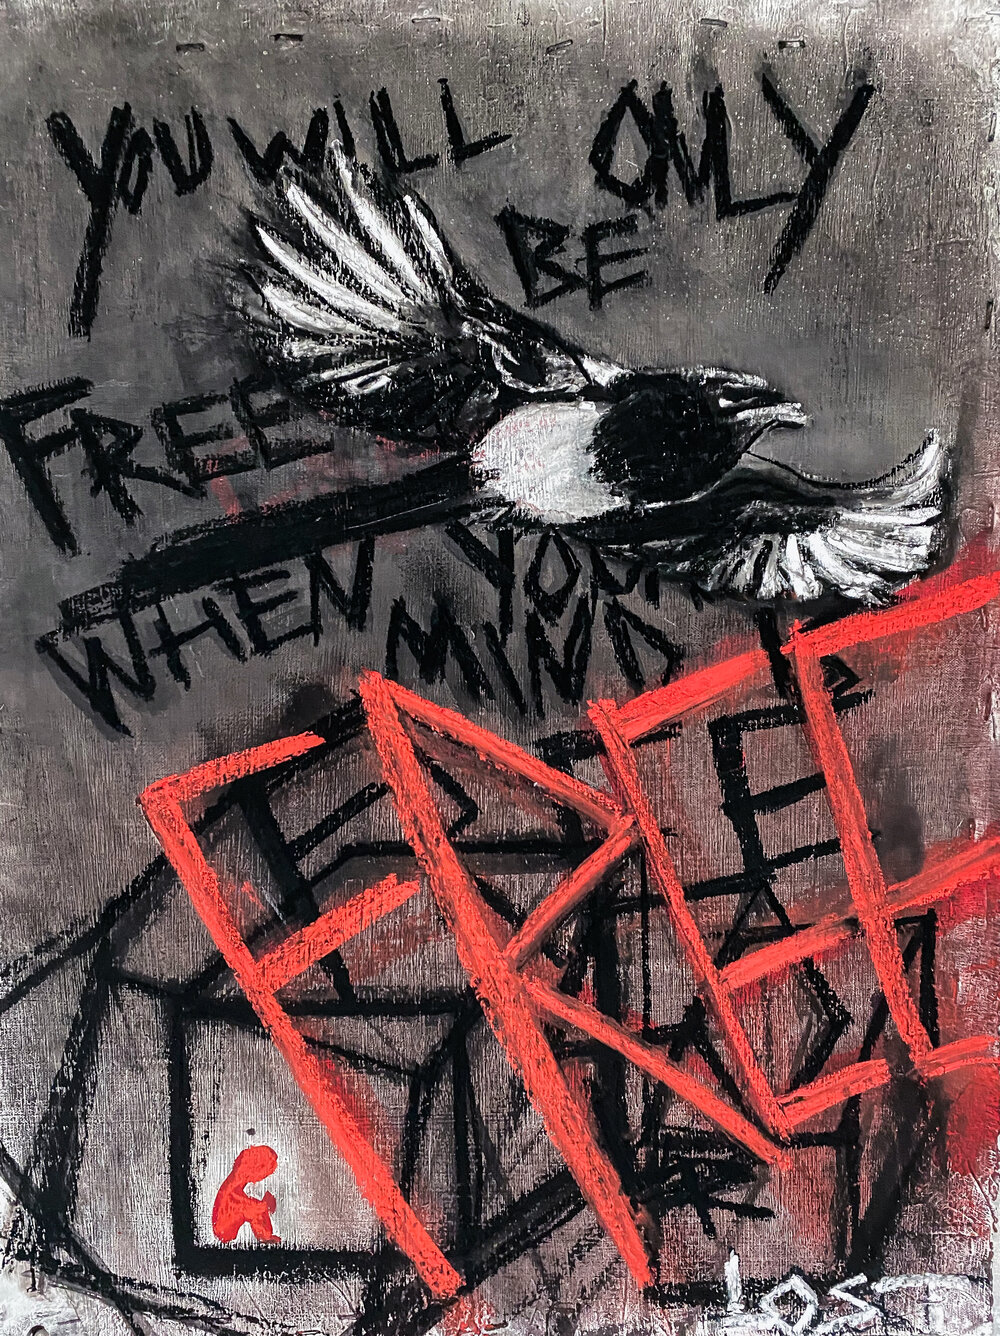 'You Will Only Be Free When Your Mind Is Free' by Leya Russell